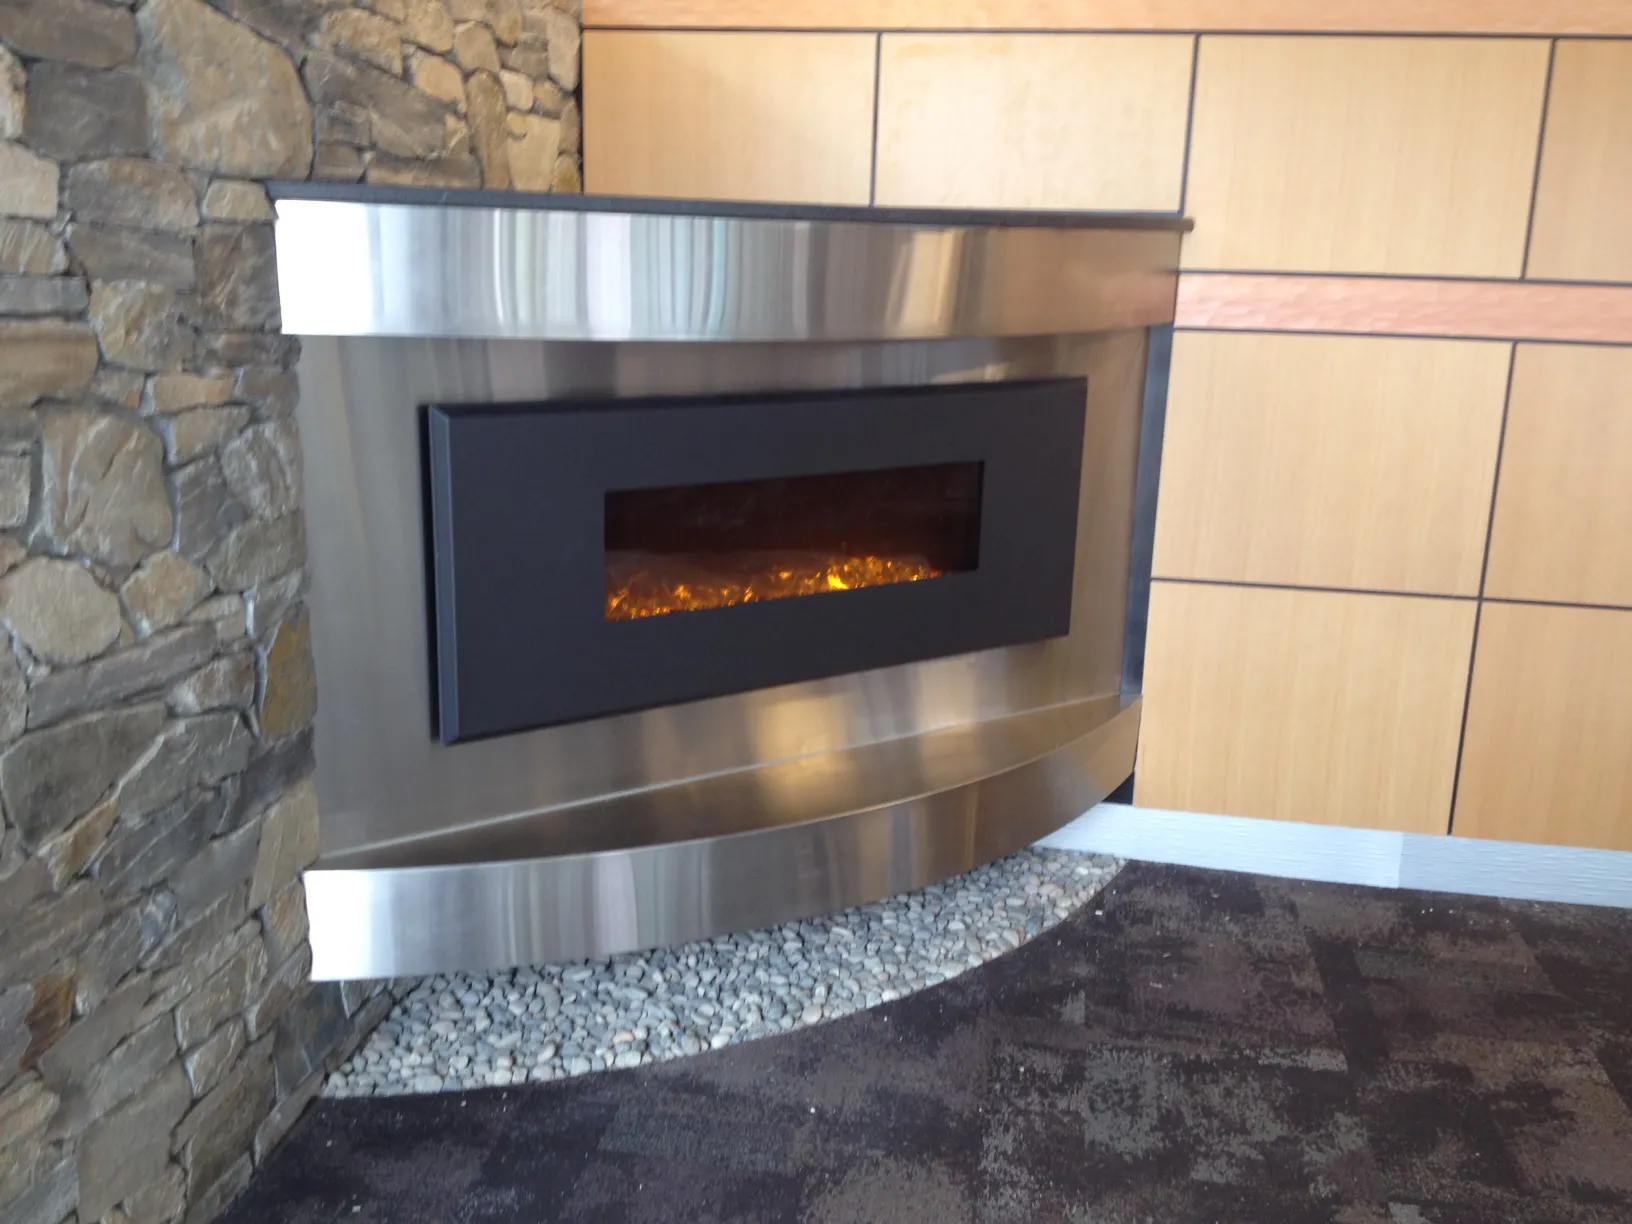 Fireplace at the Uvic in Victoria BC made by Silver Fern Stainless